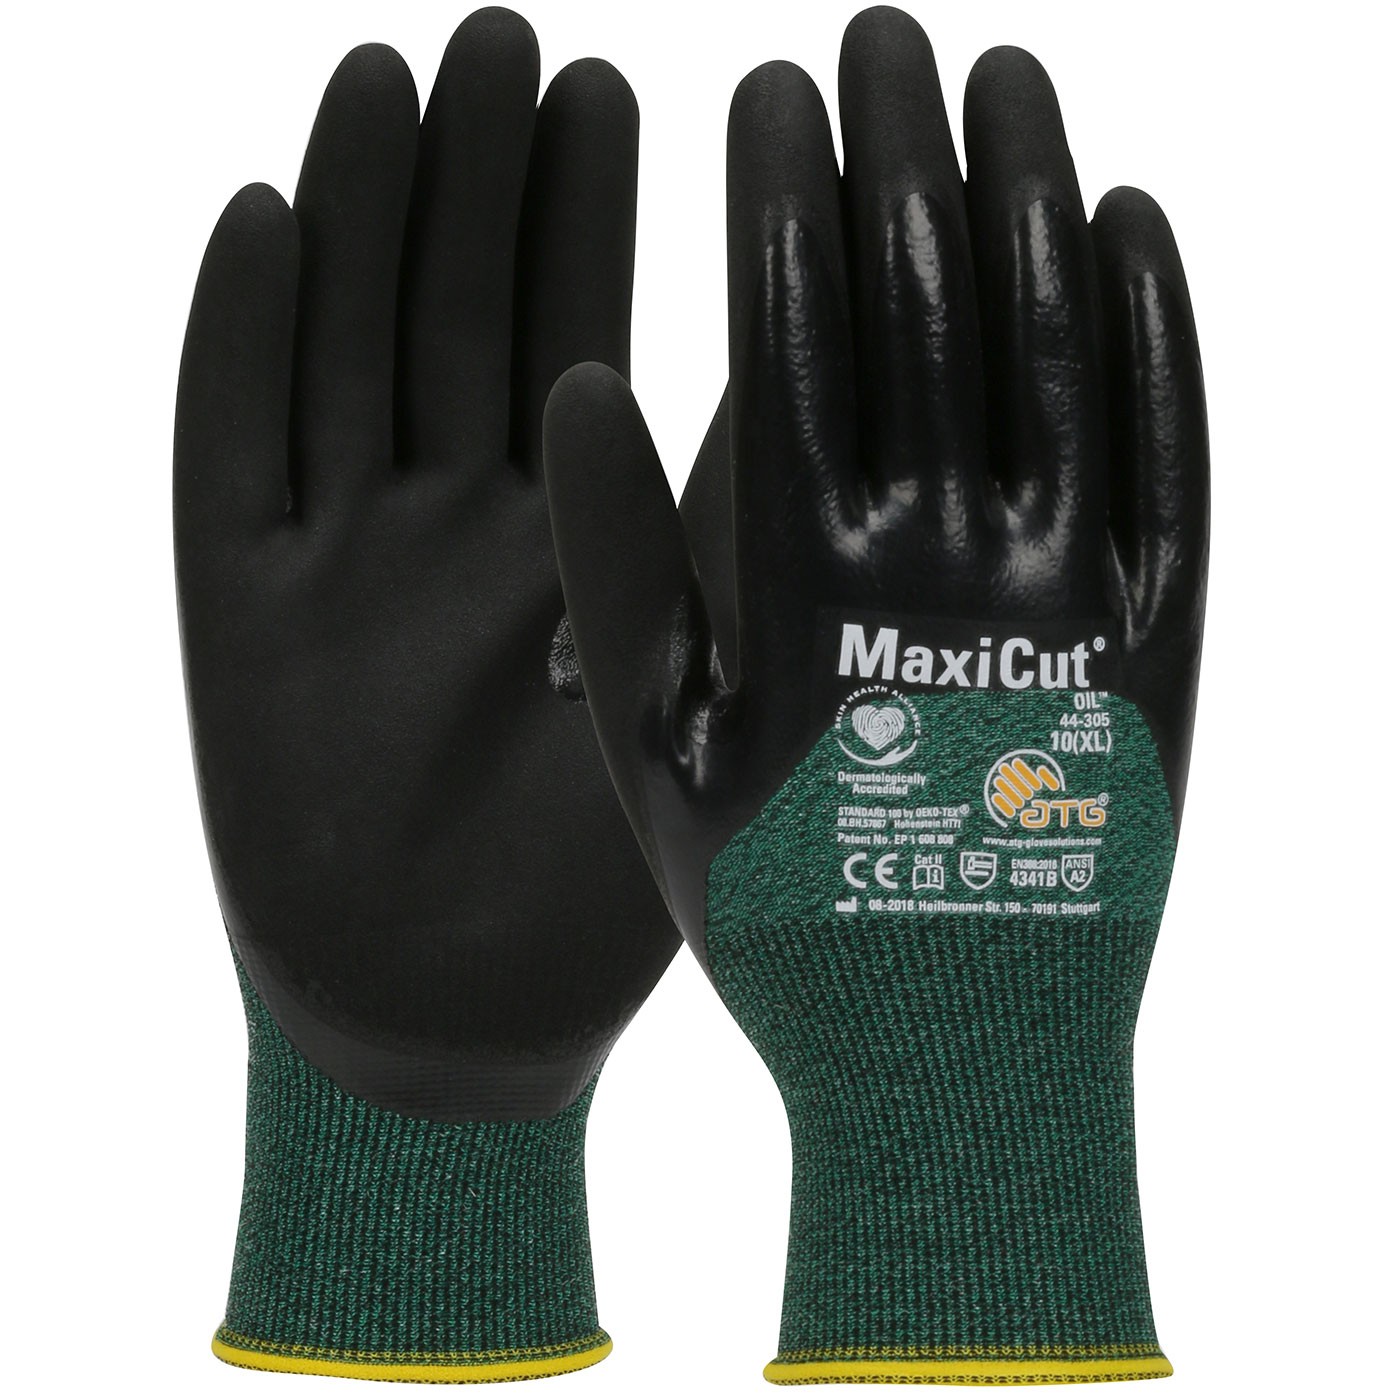 MaxiCut® Oil Seamless Knit Engineered Yarn Glove with Nitrile Coated MicroFoam Grip on Palm, Fingers & Knuckles  (#44-305)